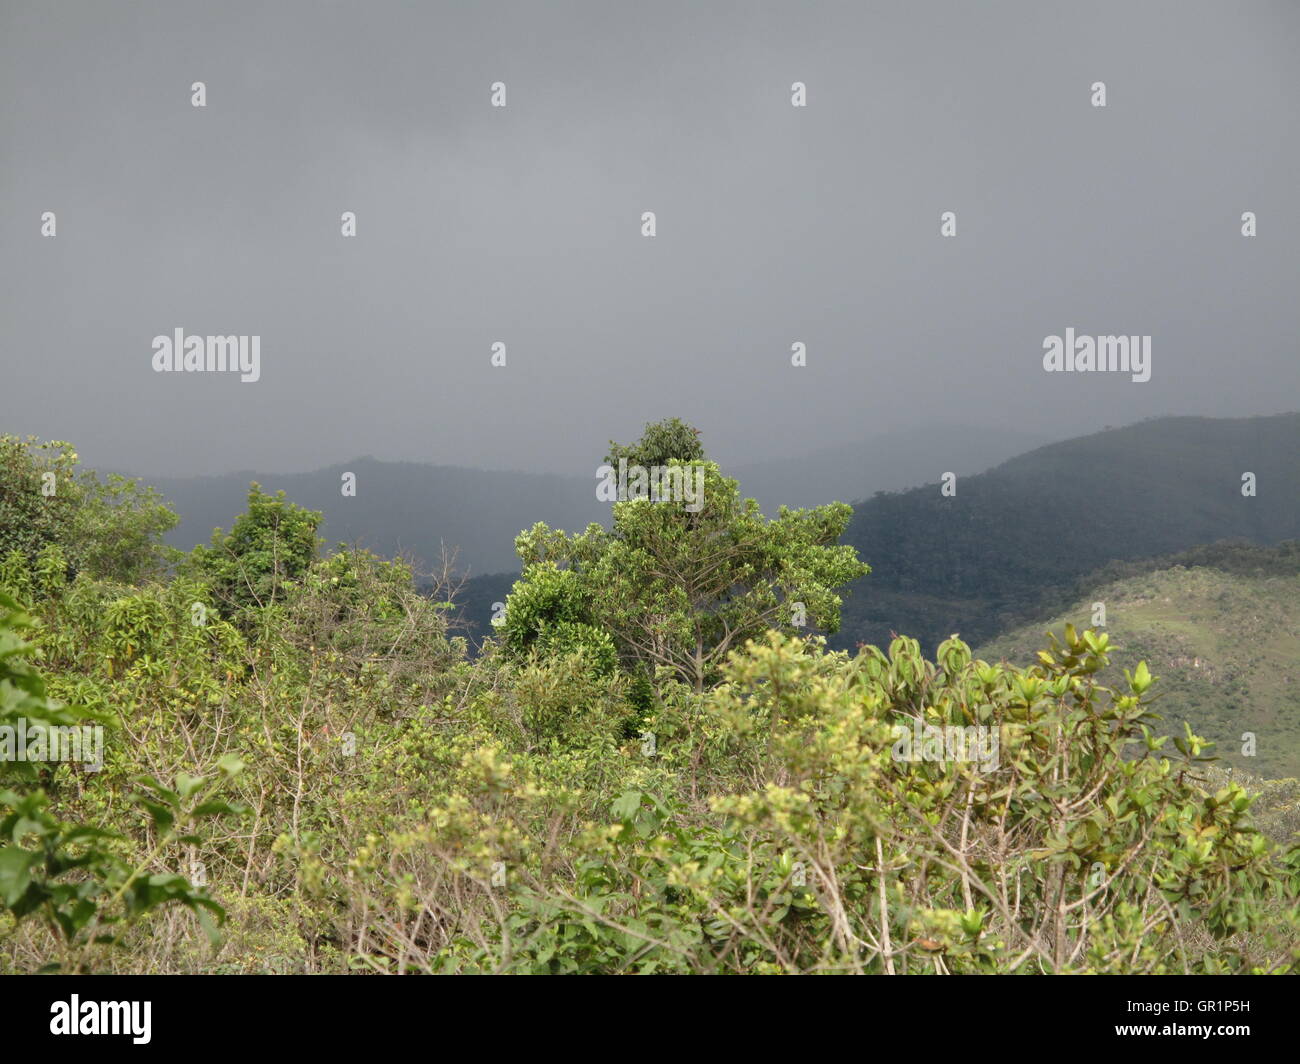 cloudly day overcast  skies with rain Stock Photo